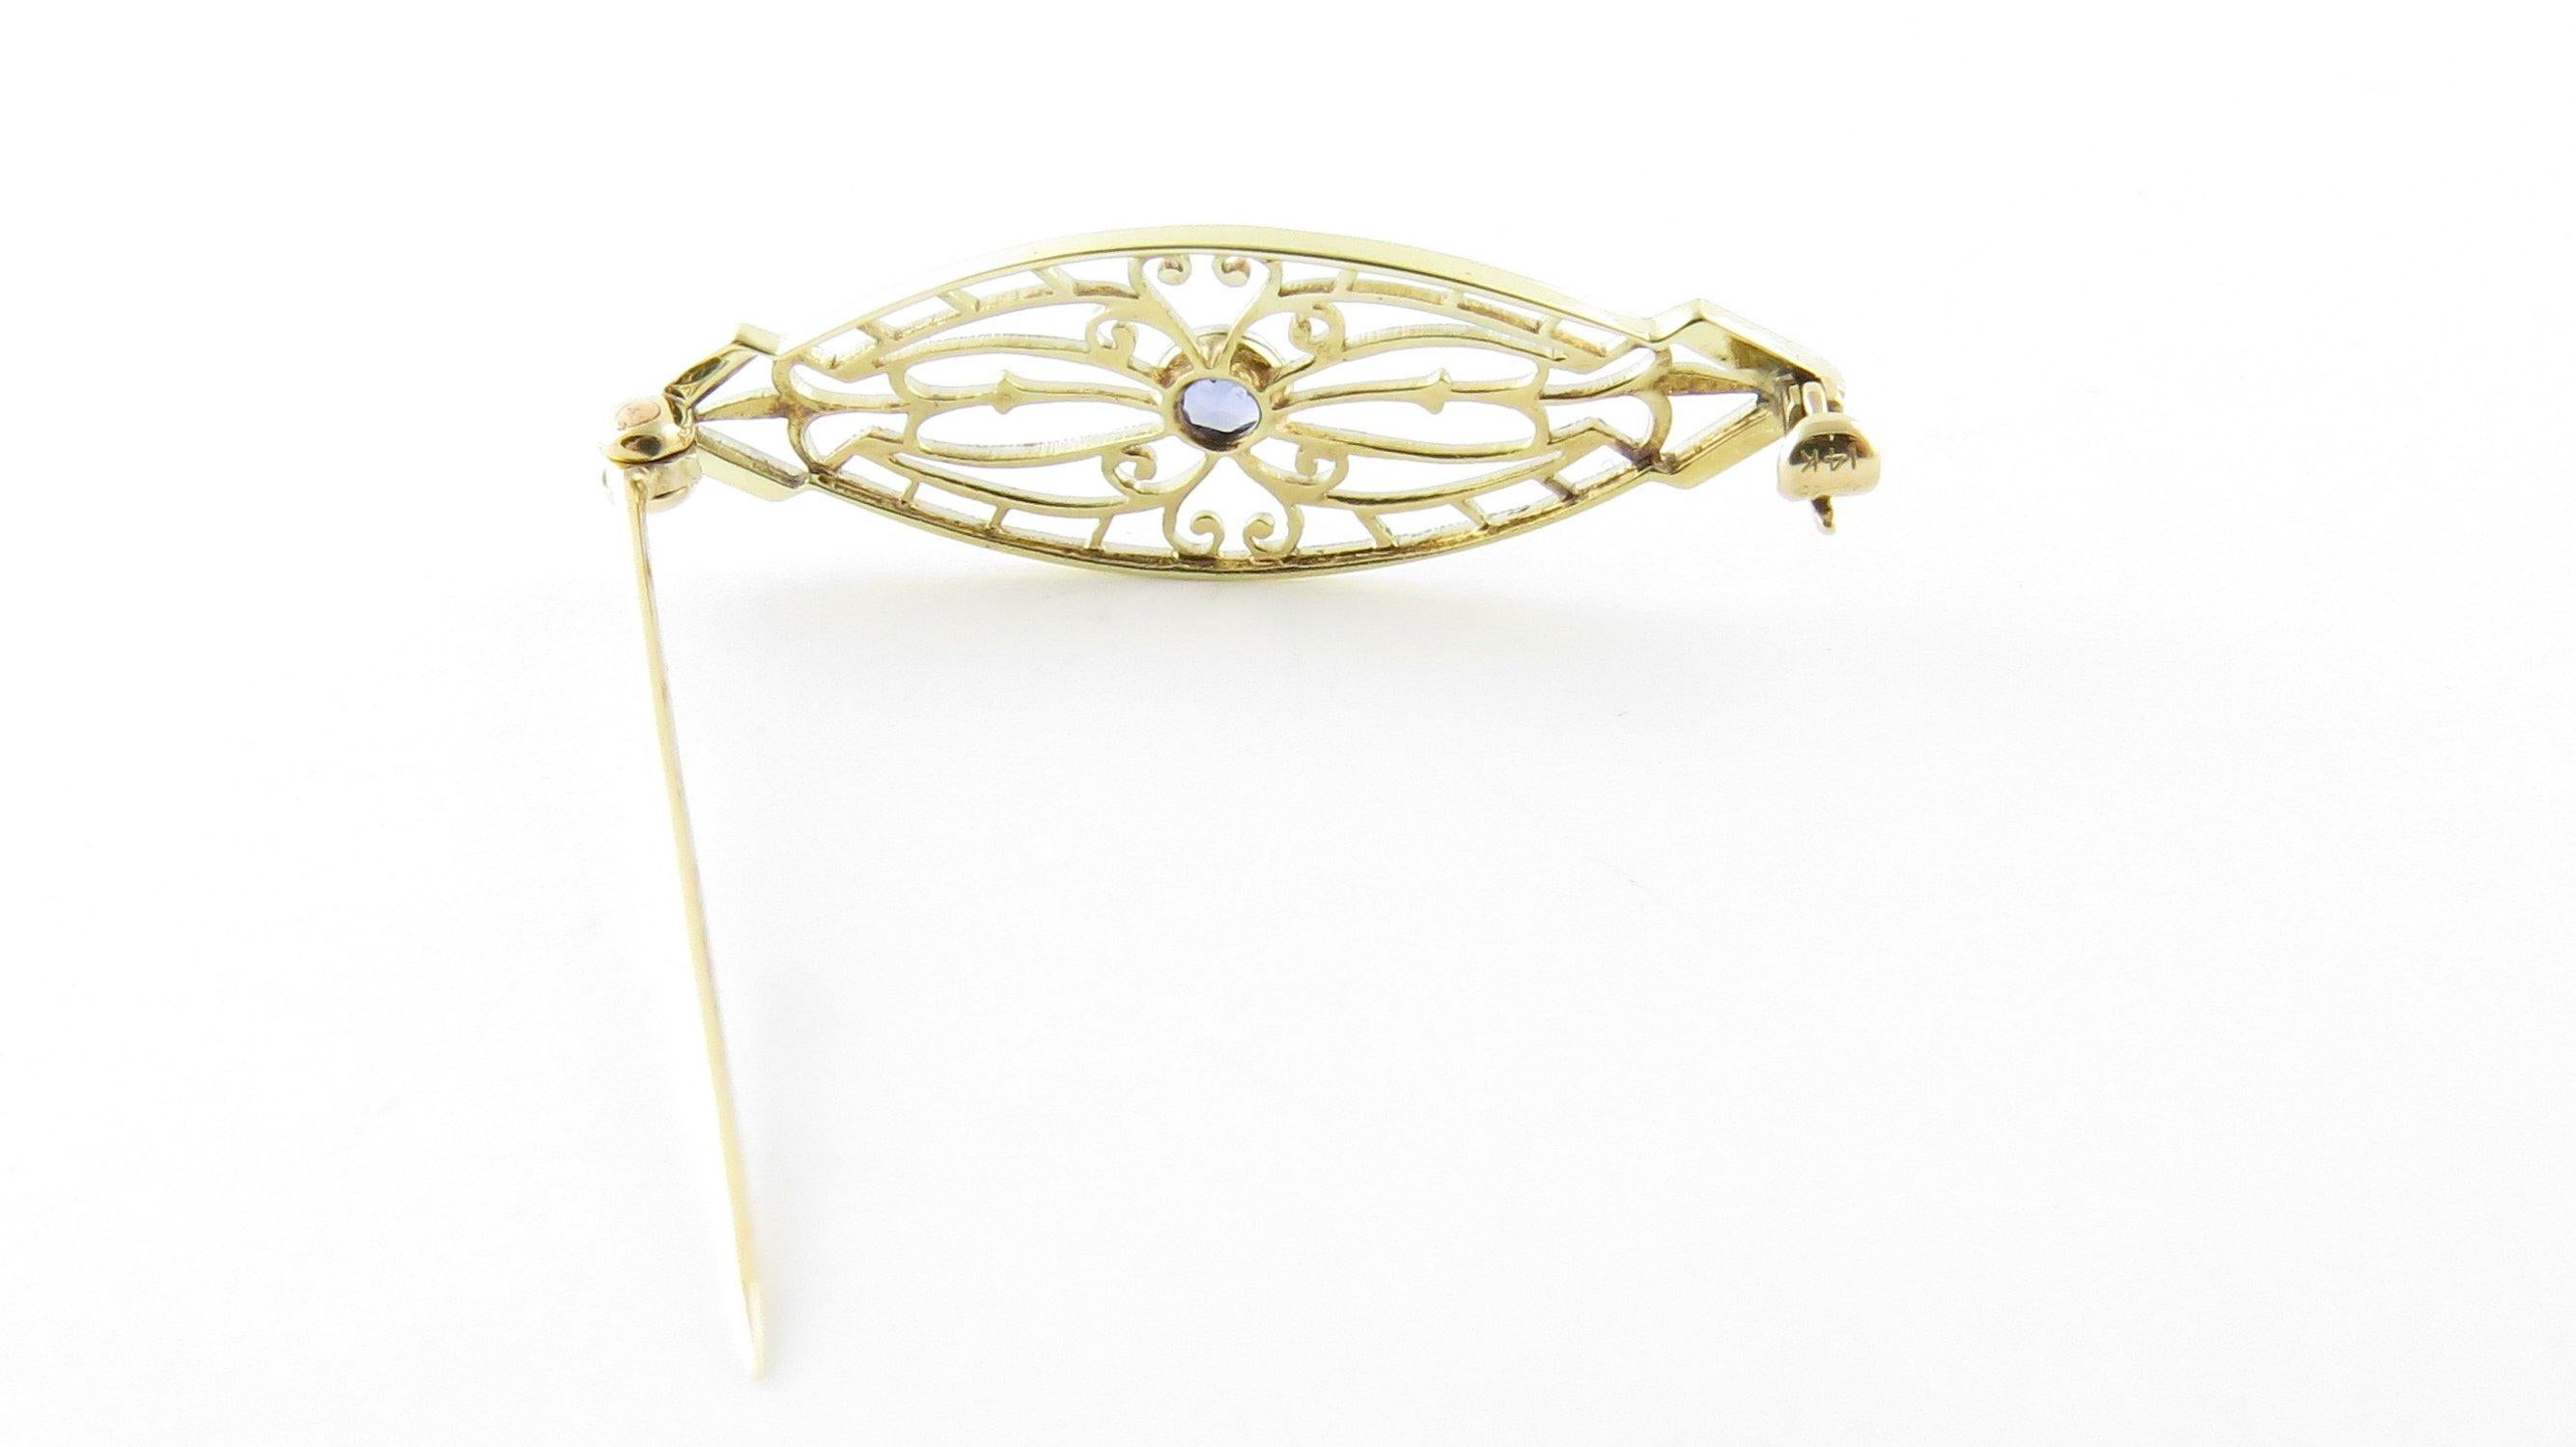 14 Karat White and Yellow Gold and Sapphire Brooch or Pin 4